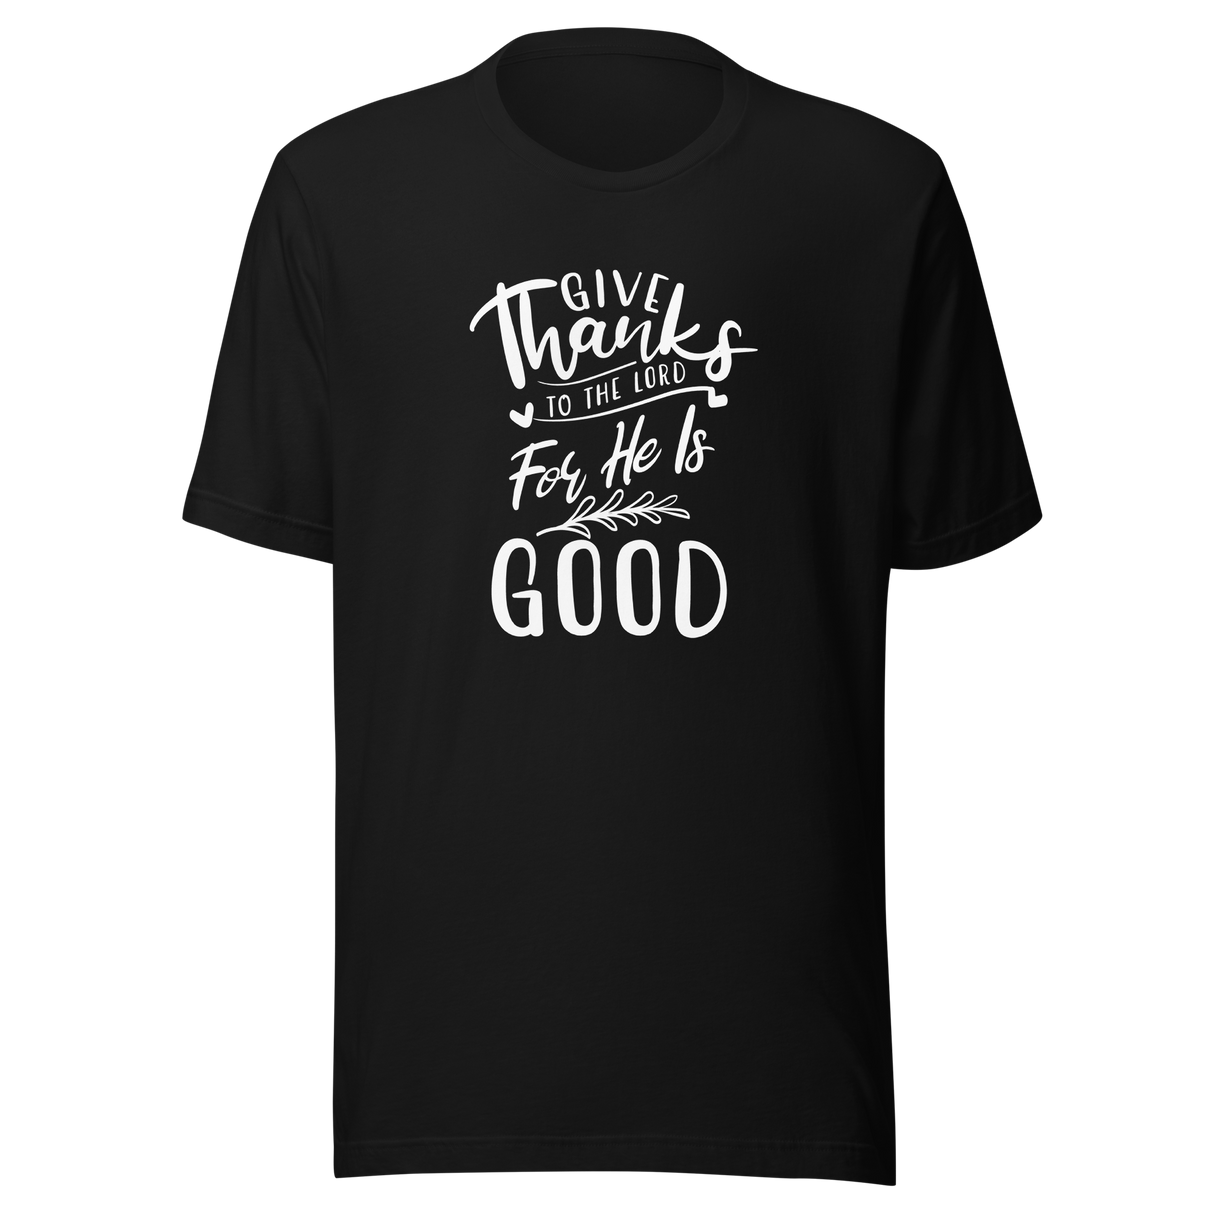 give-thanks-to-the-lord-for-he-is-good-christian-tee-bible-verse-t-shirt-thanksgiving-tee-faith-t-shirt-religion-tee#color_black